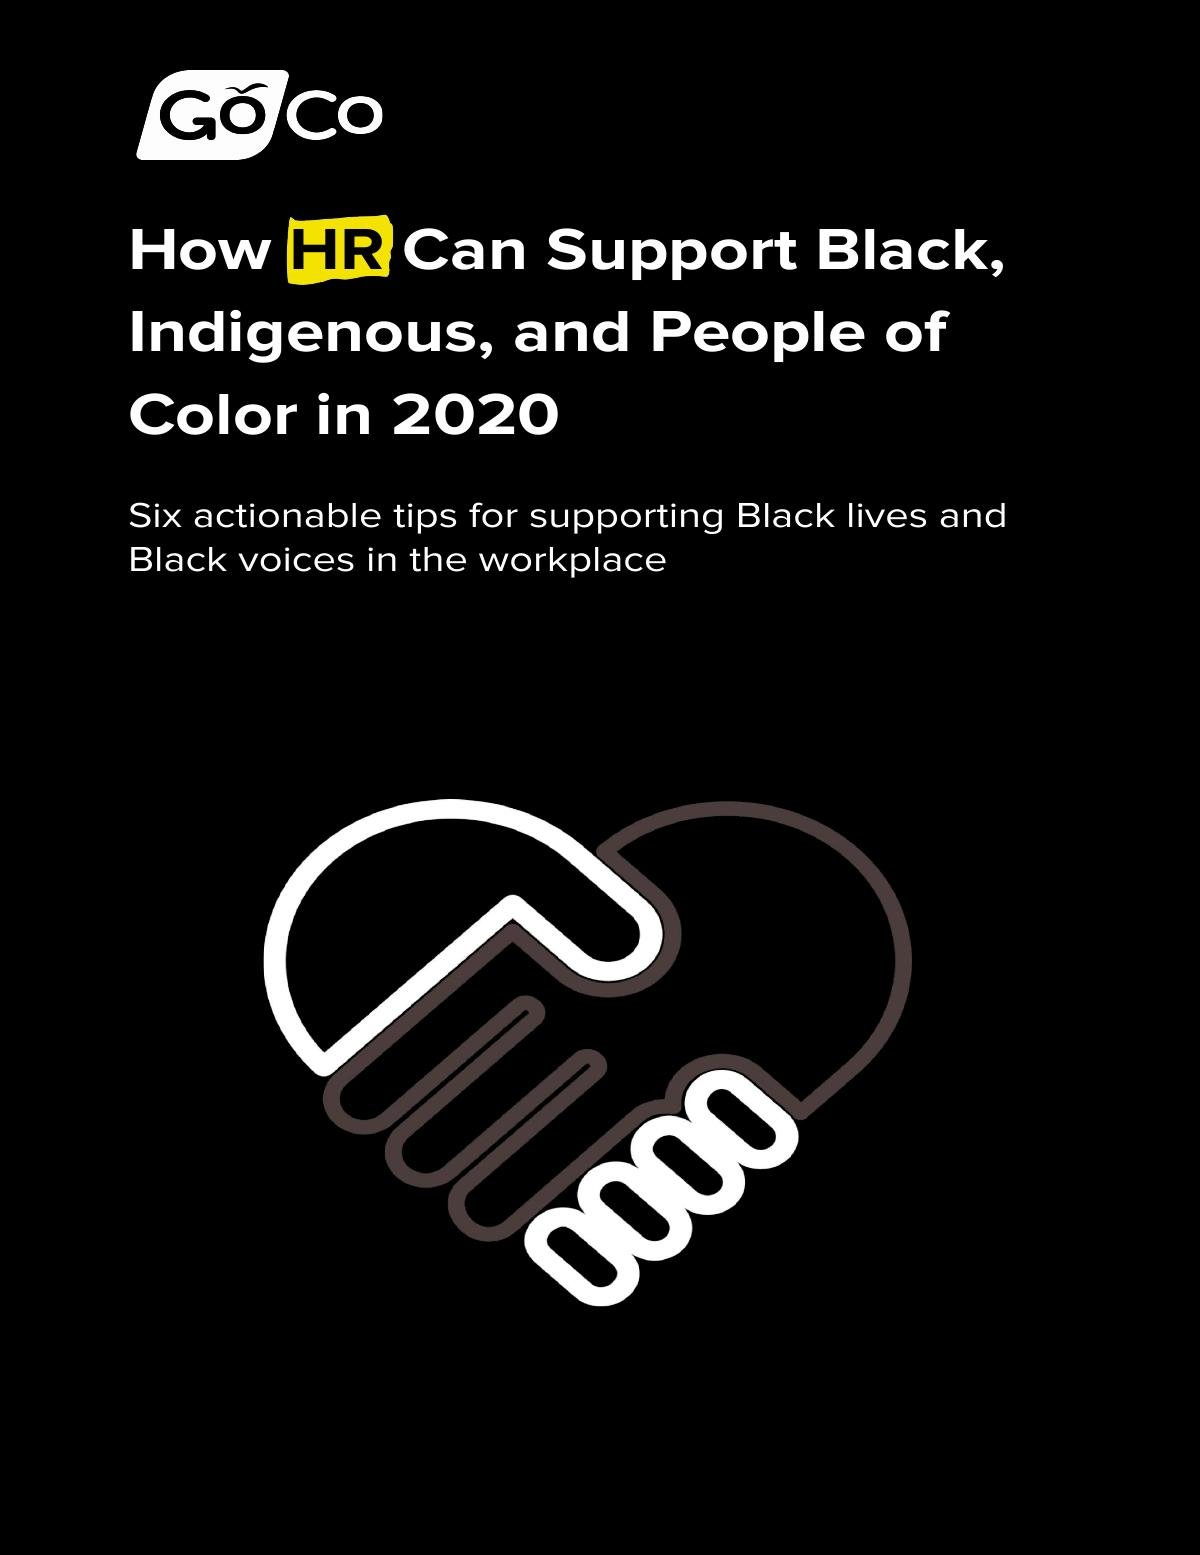 How HR Can Support Black, Indigenous, and People of Color in 2020